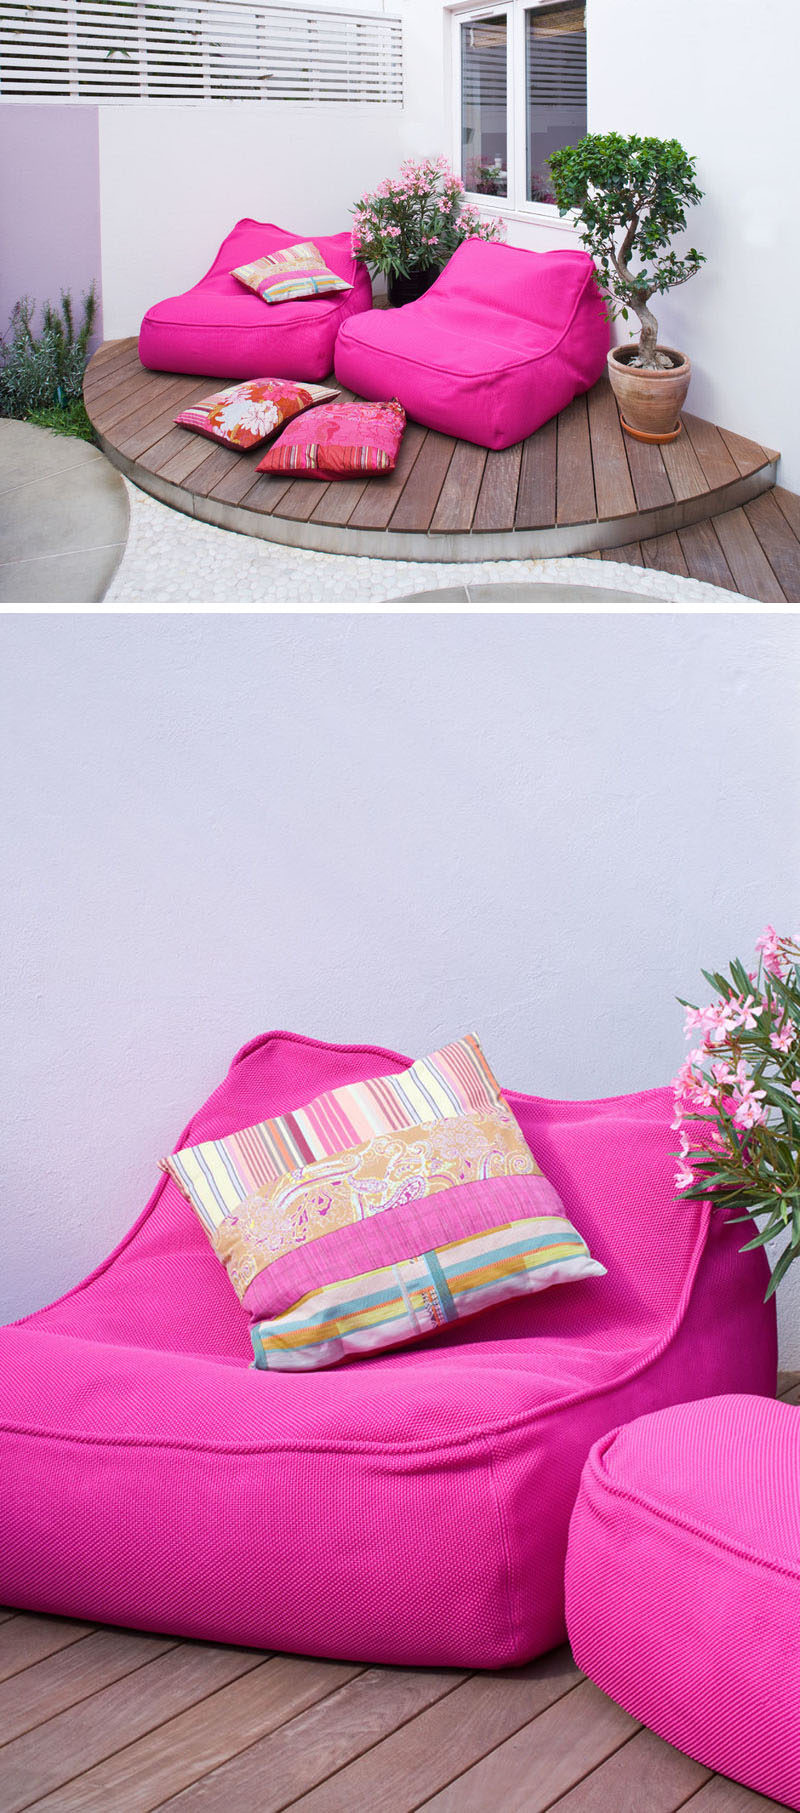 In this modern garden theres a relaxed seating area with soft, bright pink lounge chairs that sit on a raised platform.